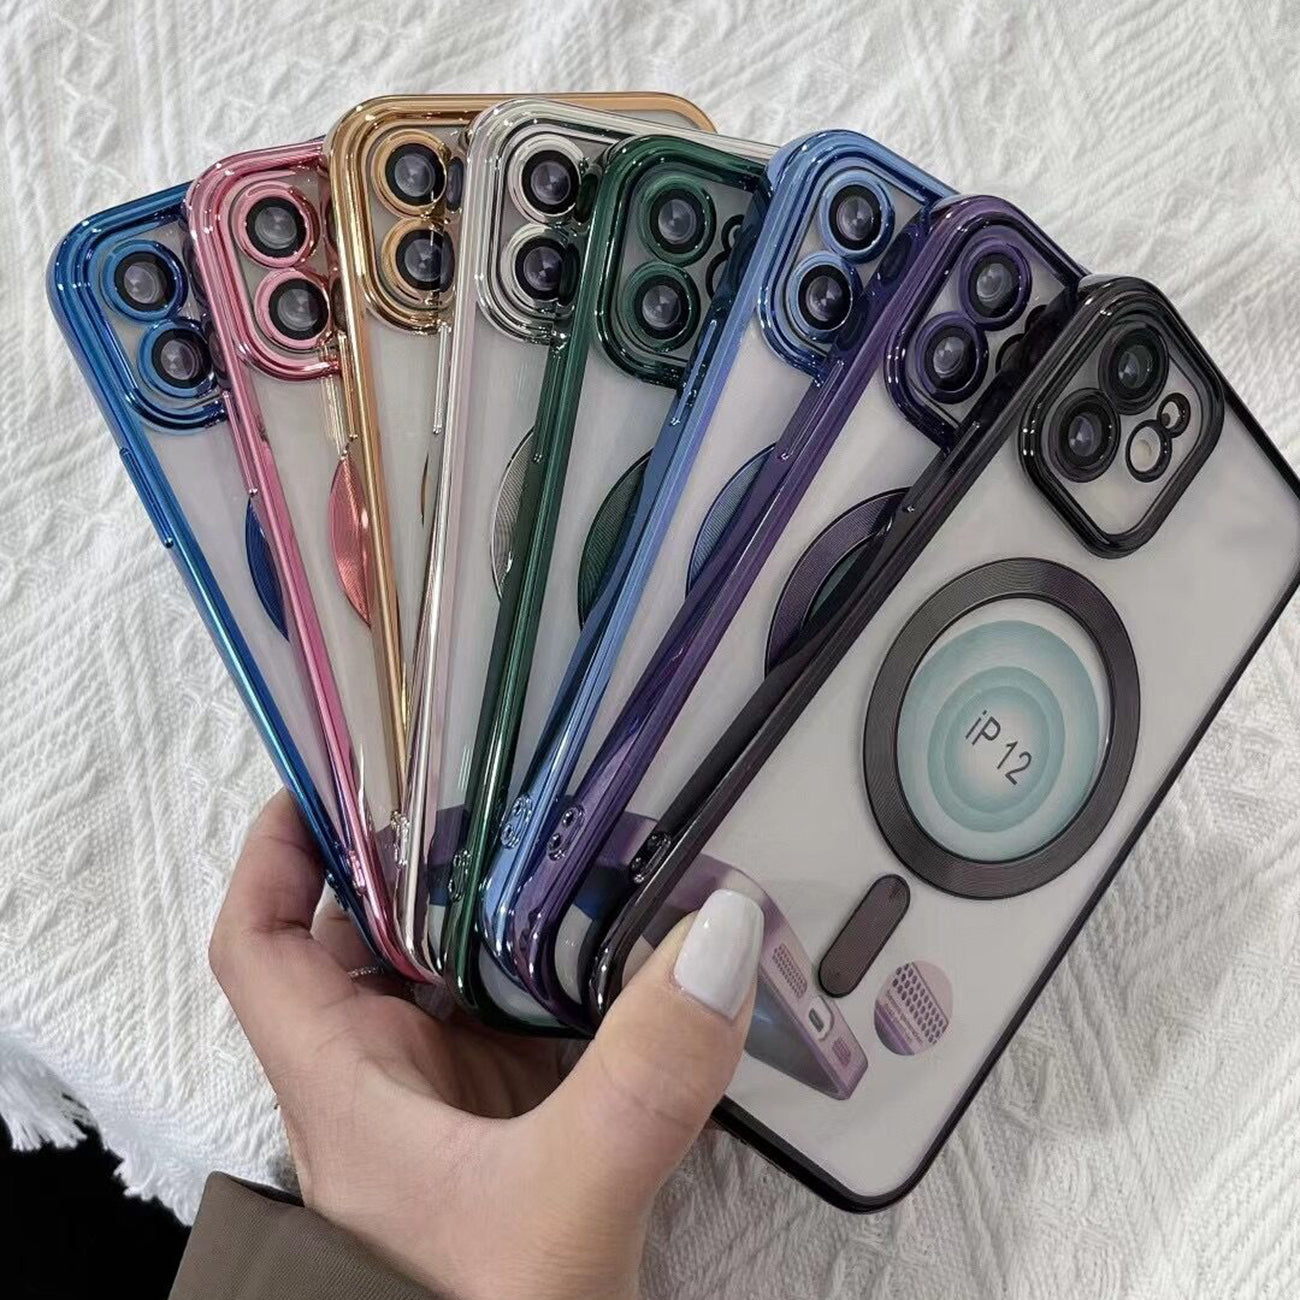 Case Bumper TPU Magnetic Wireless Charging iPhone 11 Blue Color